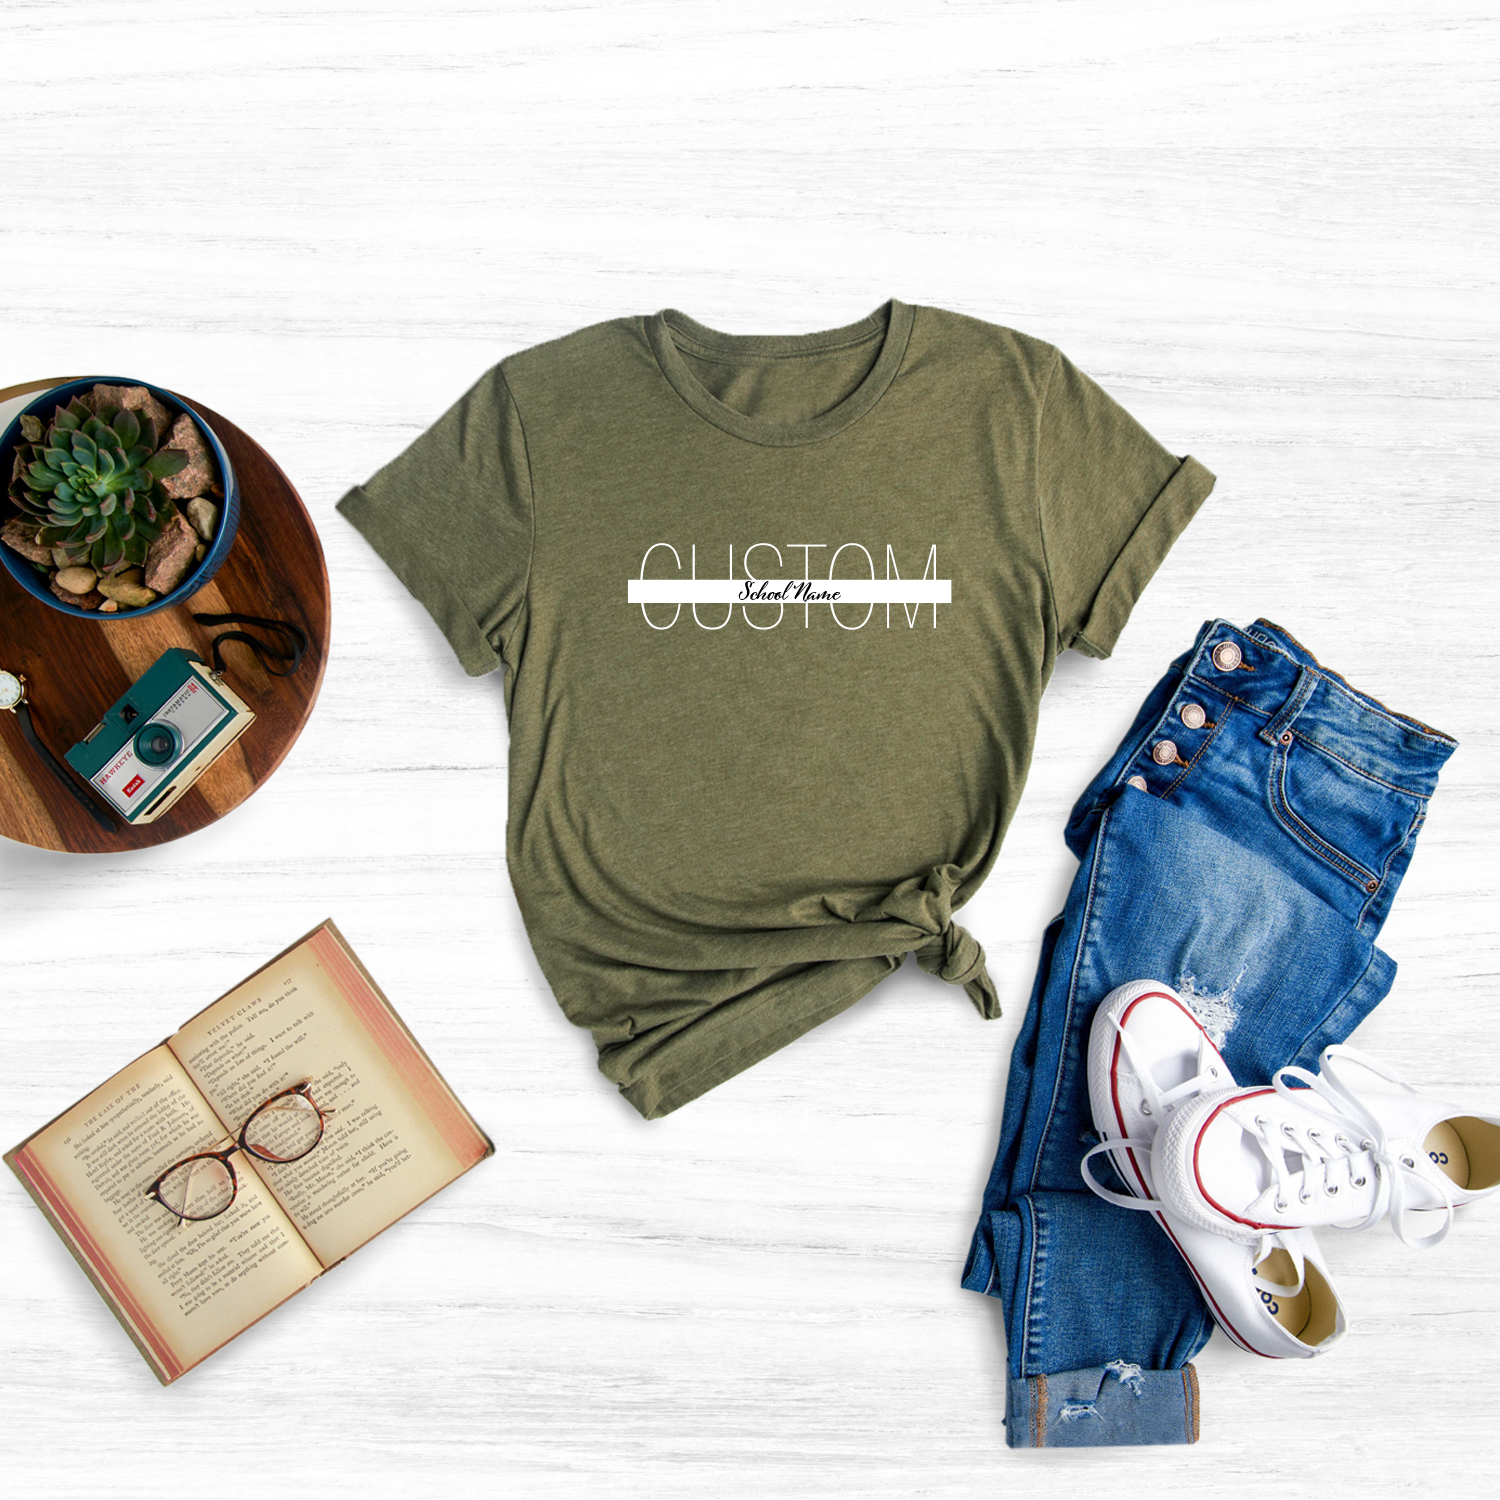 Express your love for teaching and dedication to your students with personalized tees. Design shirts for yourself or your fellow teachers to wear with pride. Create a fun and supportive atmosphere in the classroom and beyond